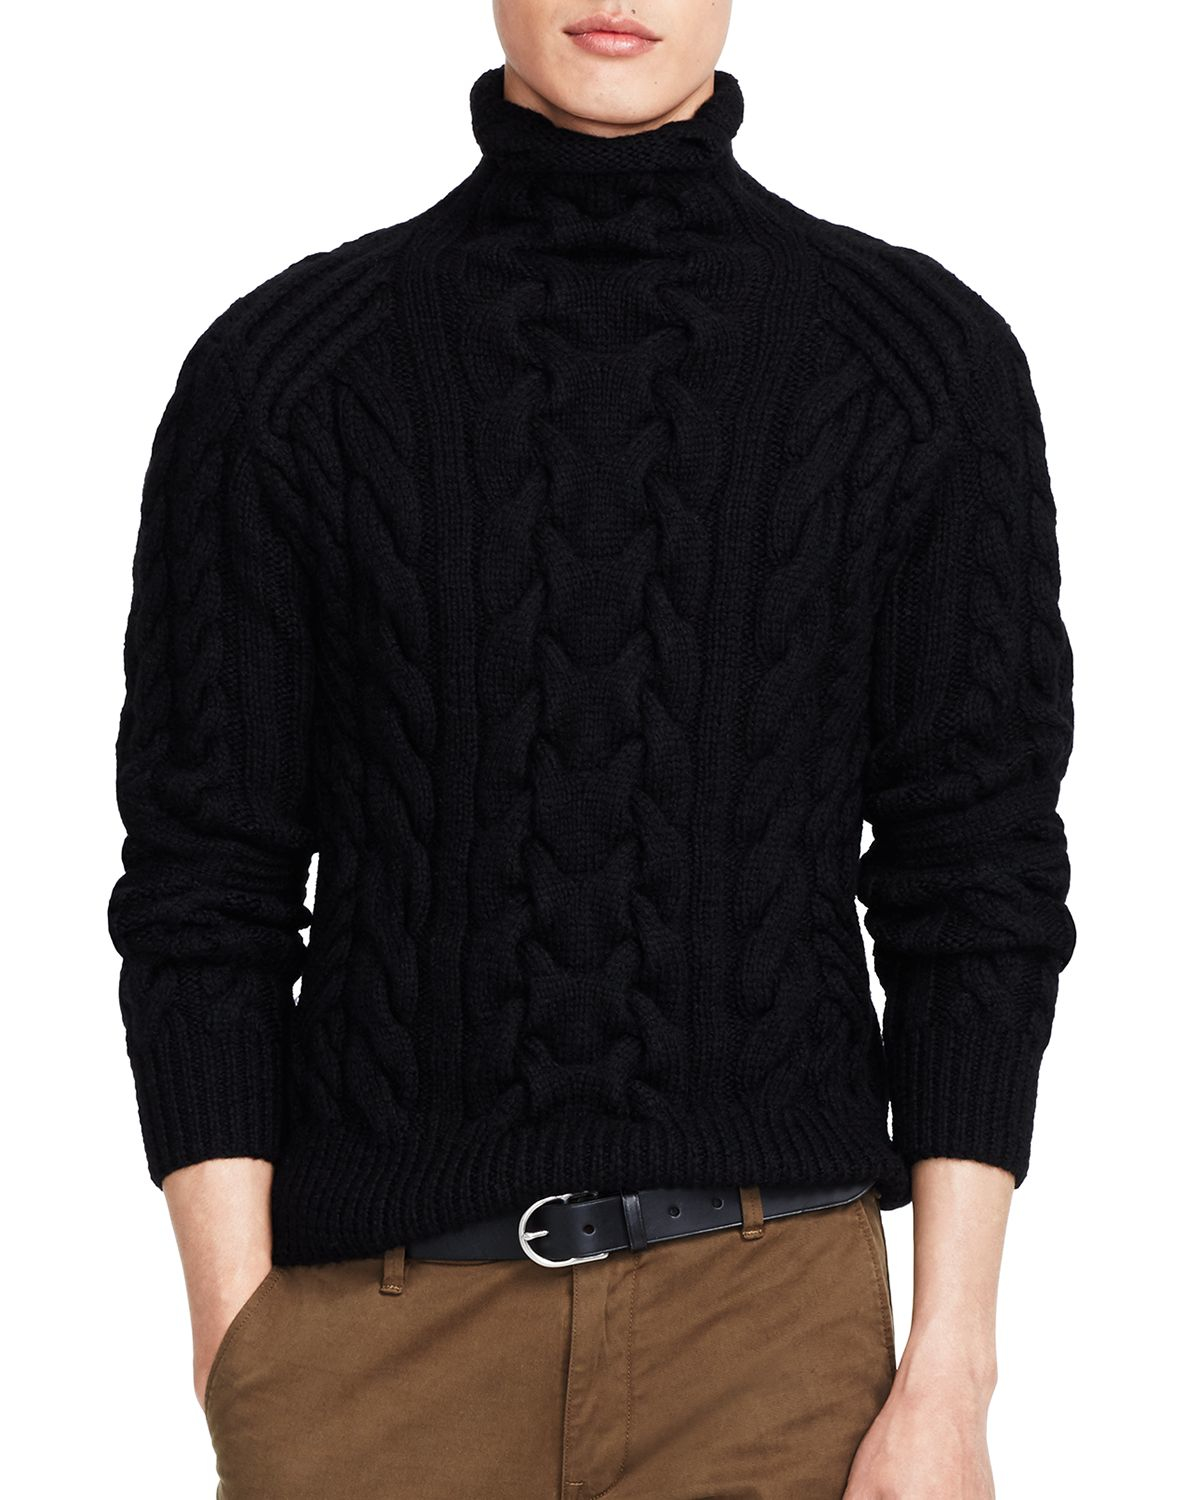 Lyst - Ralph Lauren Polo Cable-knit Turtleneck Sweater in Black for Men